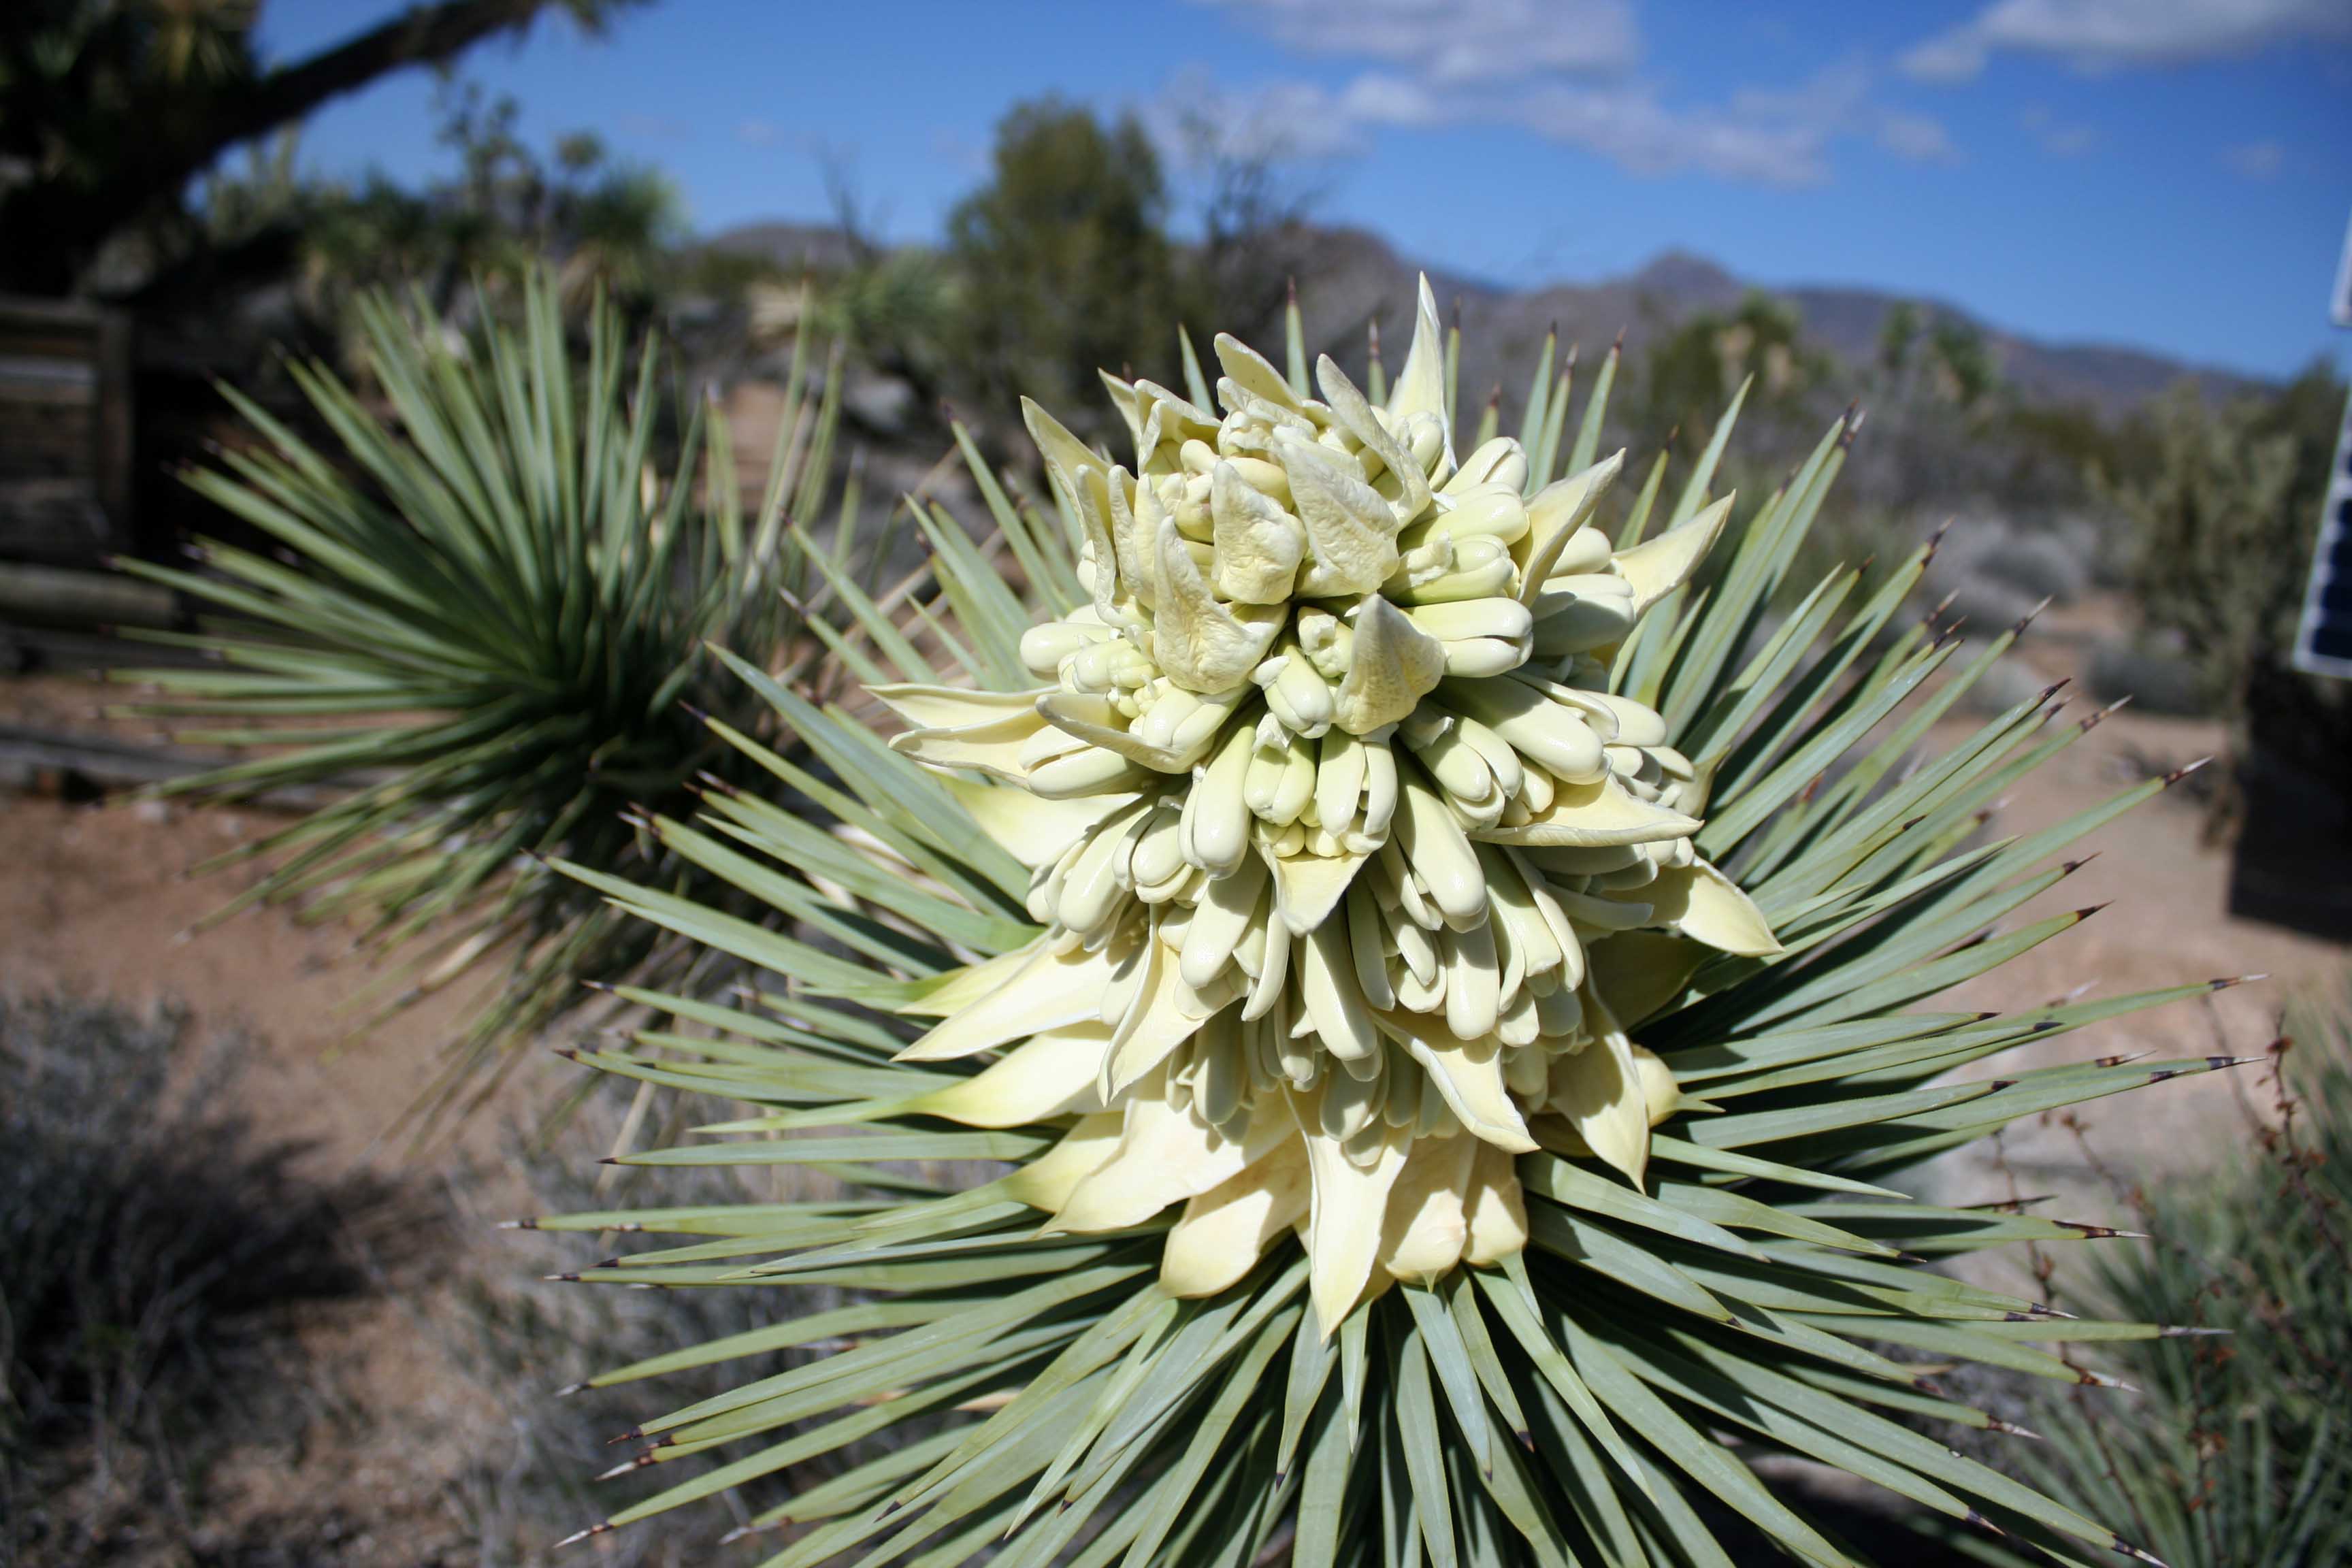 In the same family, but with distinctive flowers is this Yucca. 